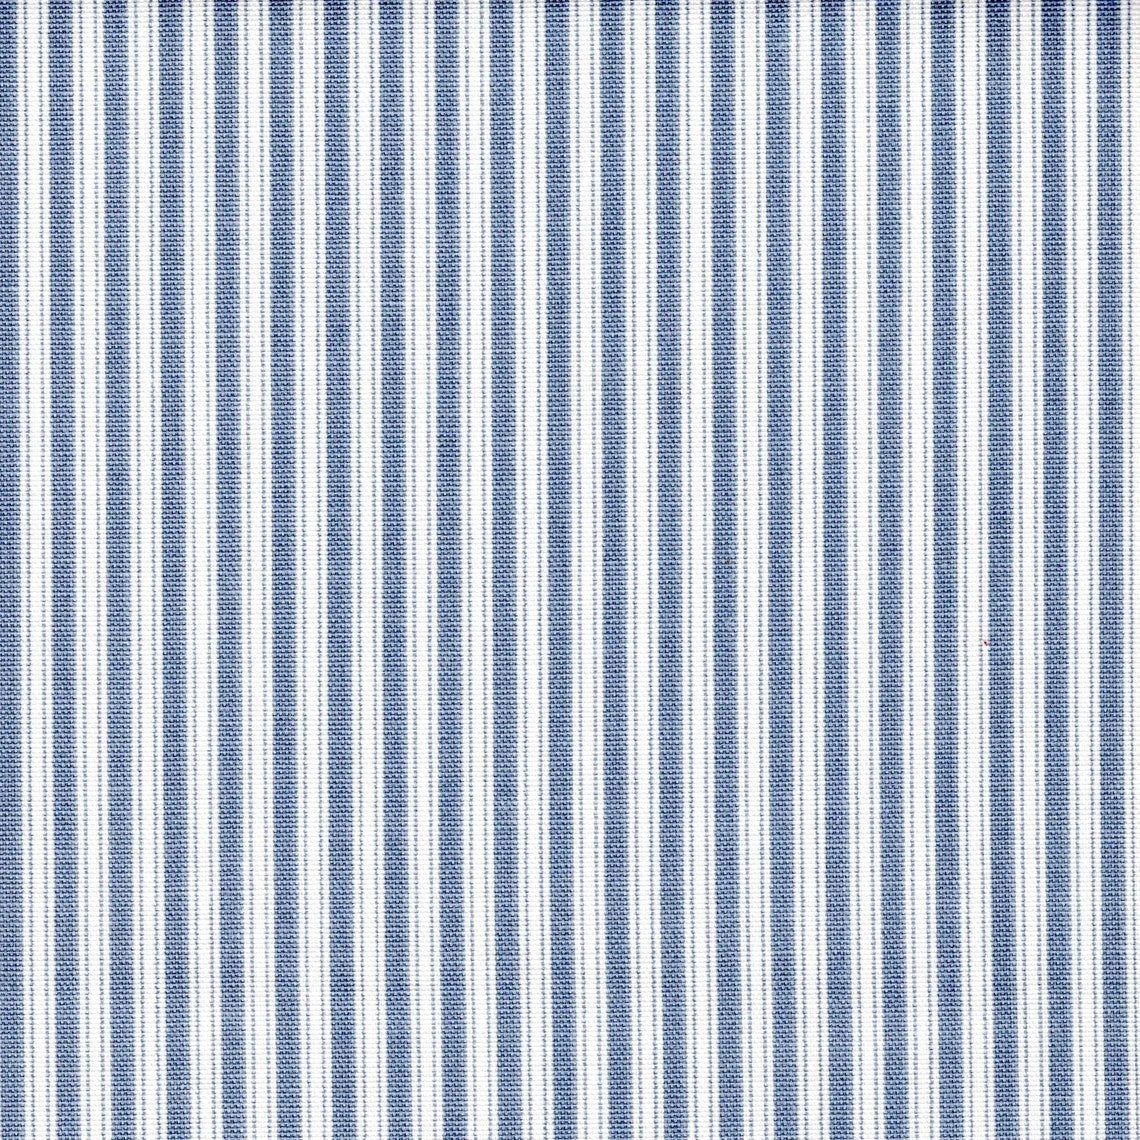 tailored tier curtains in polo sail blue stripe on white